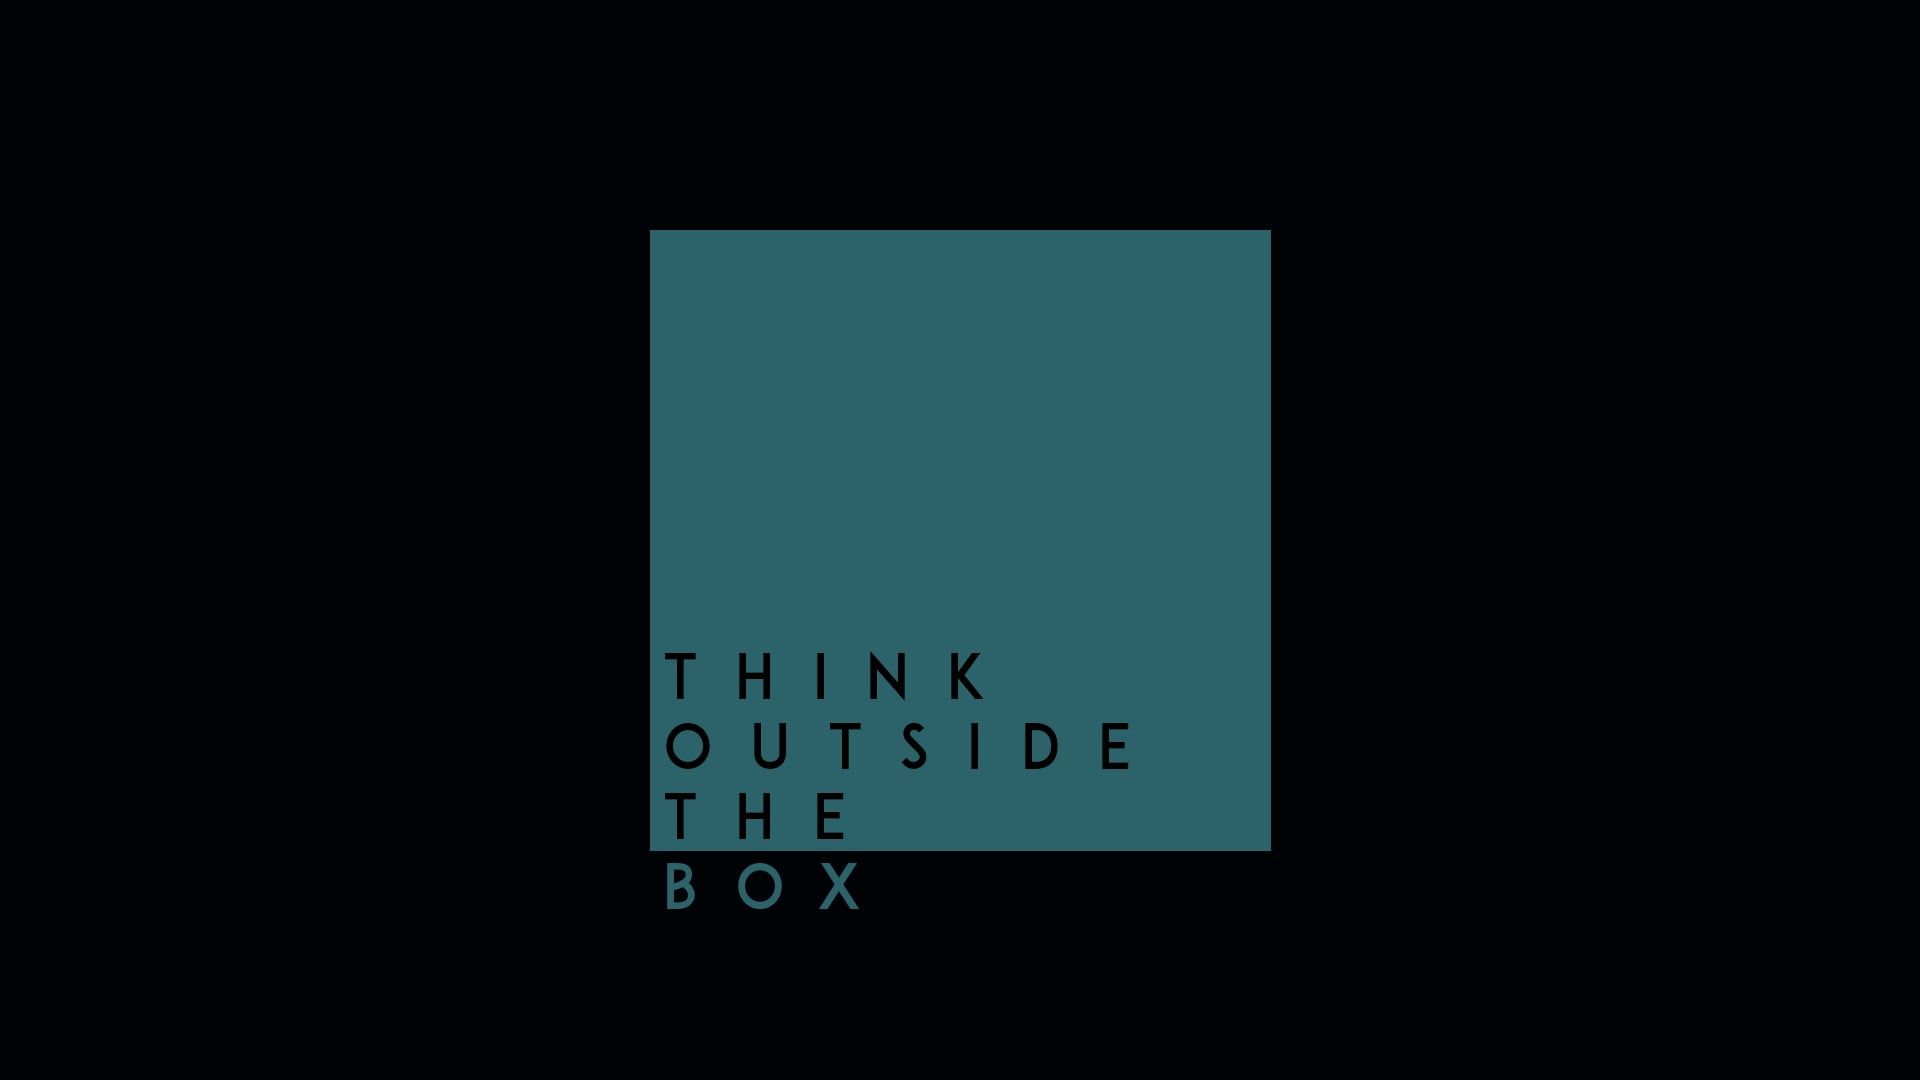 Minimalist Wallpaper • Think Outside The Box wallpaper, simple background, motivational, quote • Wallpaper For You The Best Wallpaper For Desktop & Mobile